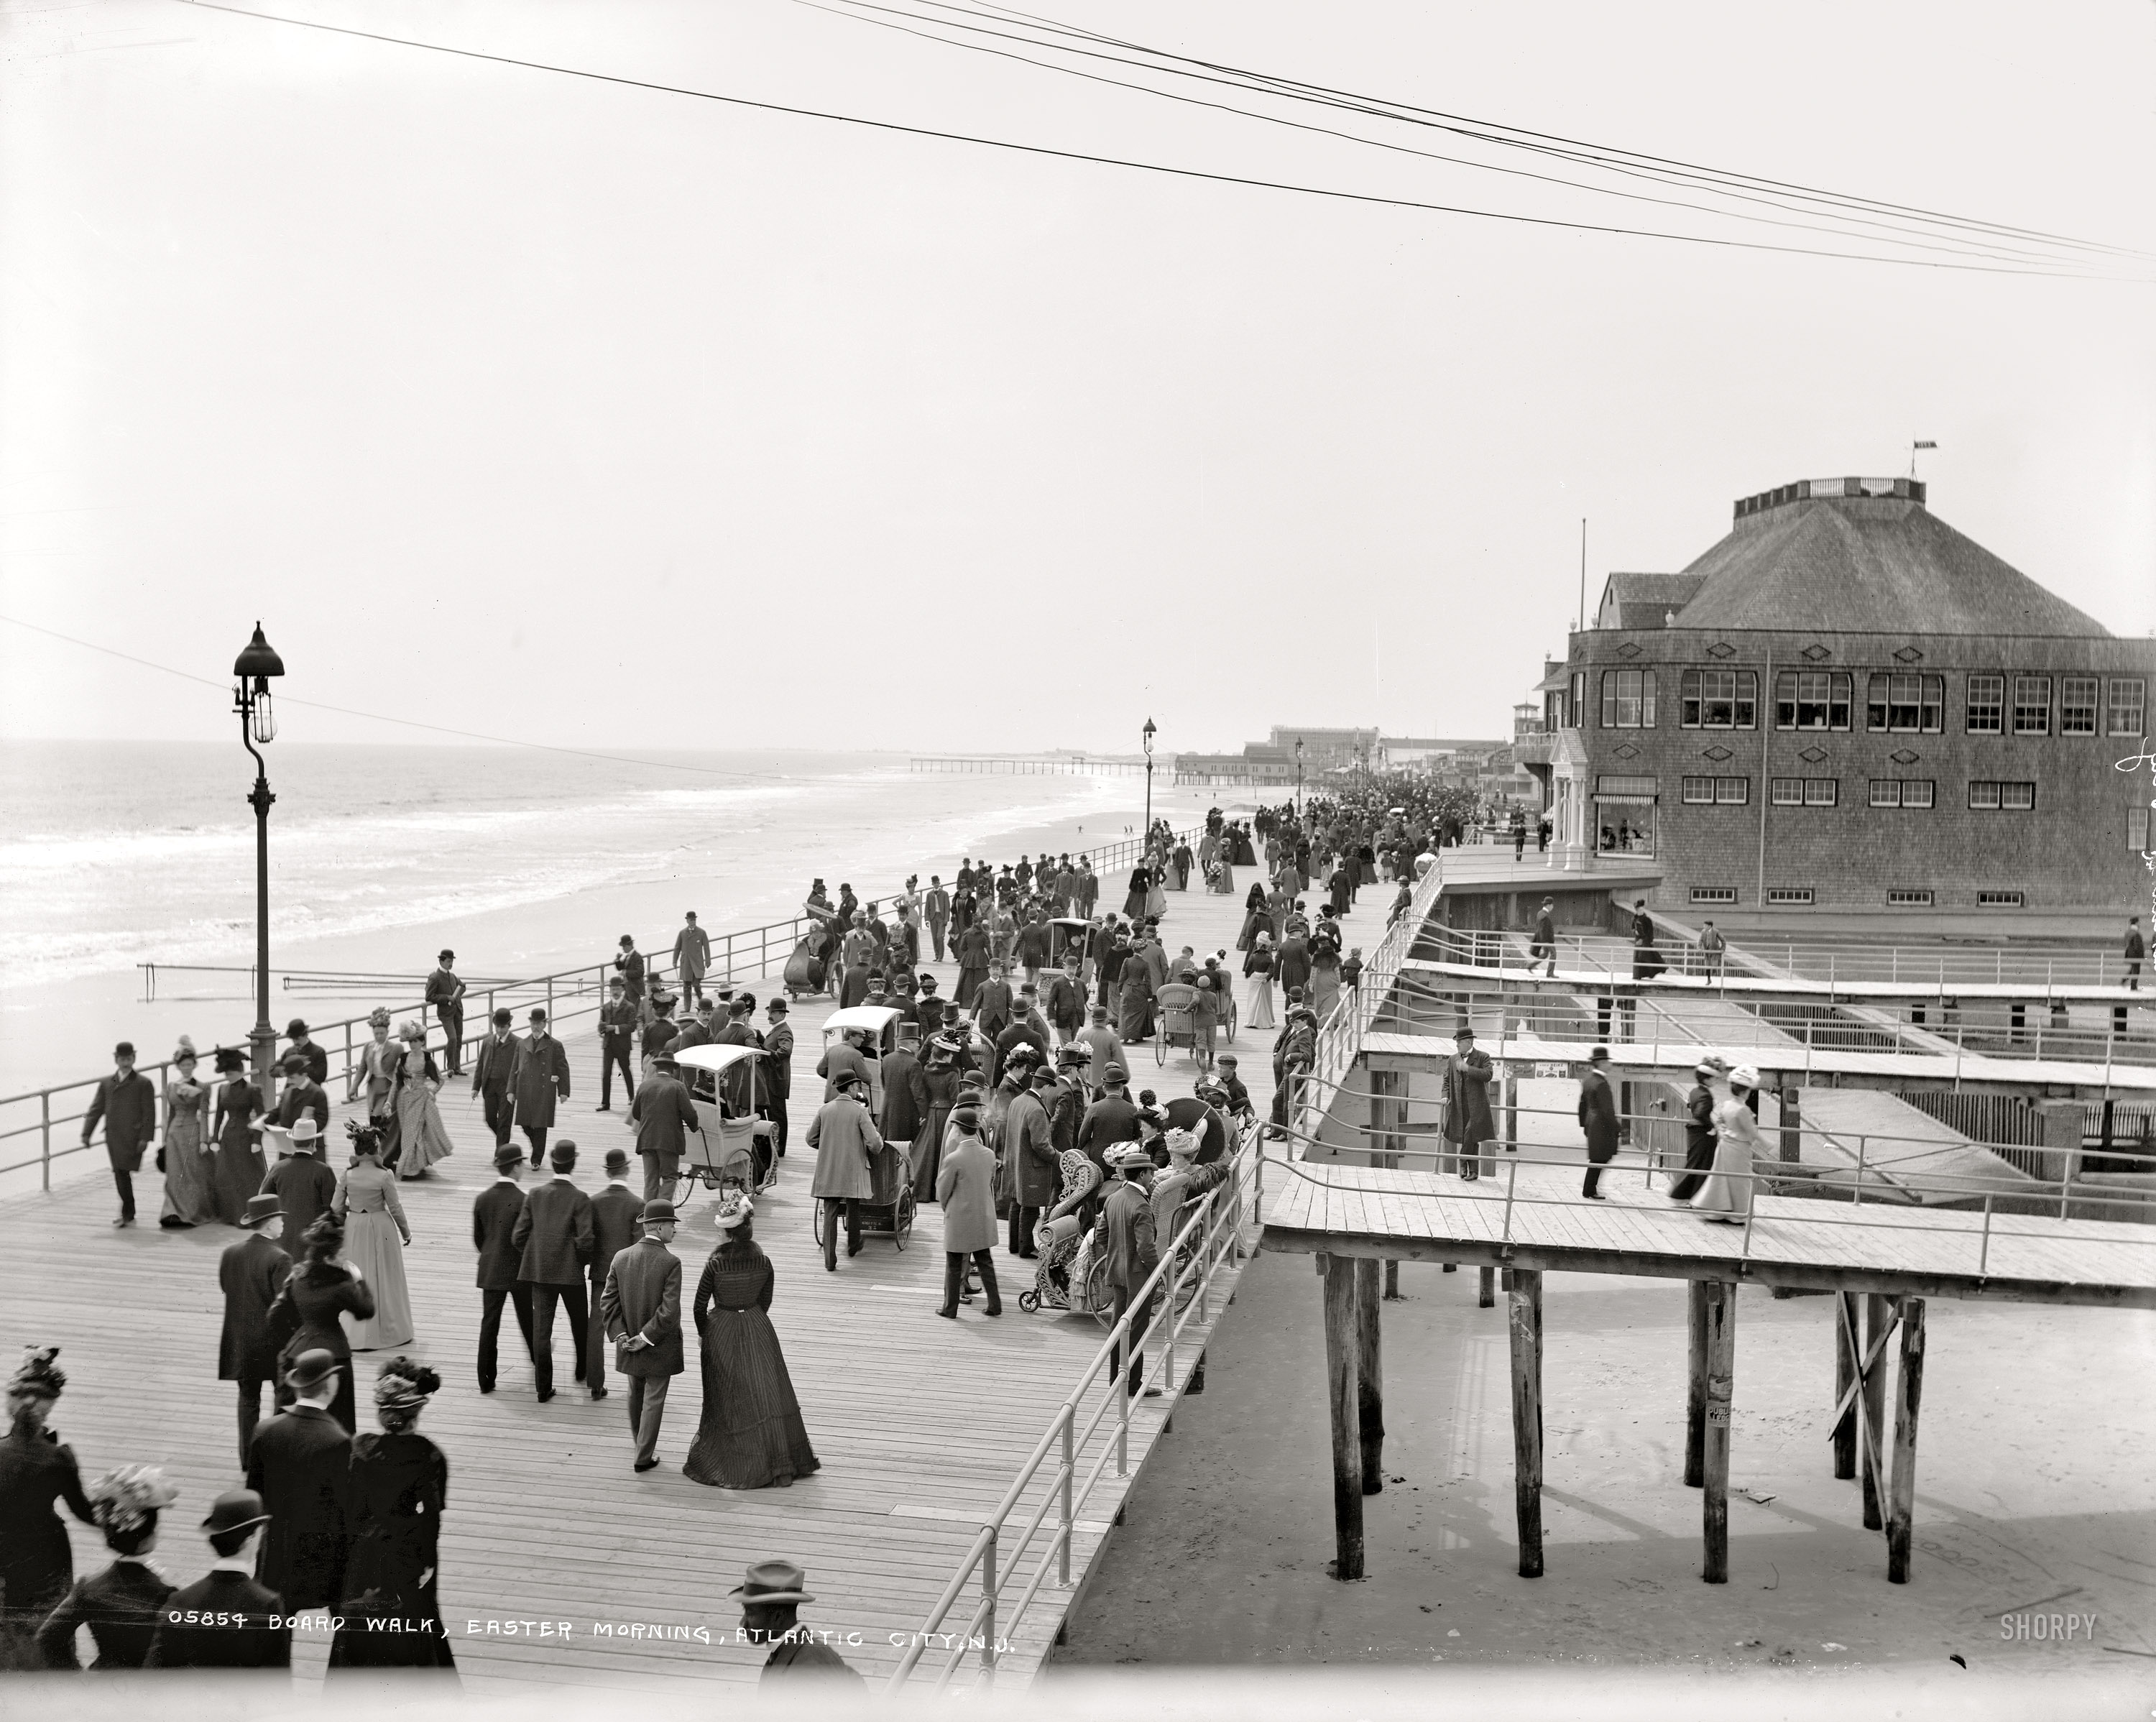 Atlantic City, New Jersey, circa 1900. "Boardwalk, Easter morning." 8x10 dry plate glass negative, Detroit Publishing Company. View full size.